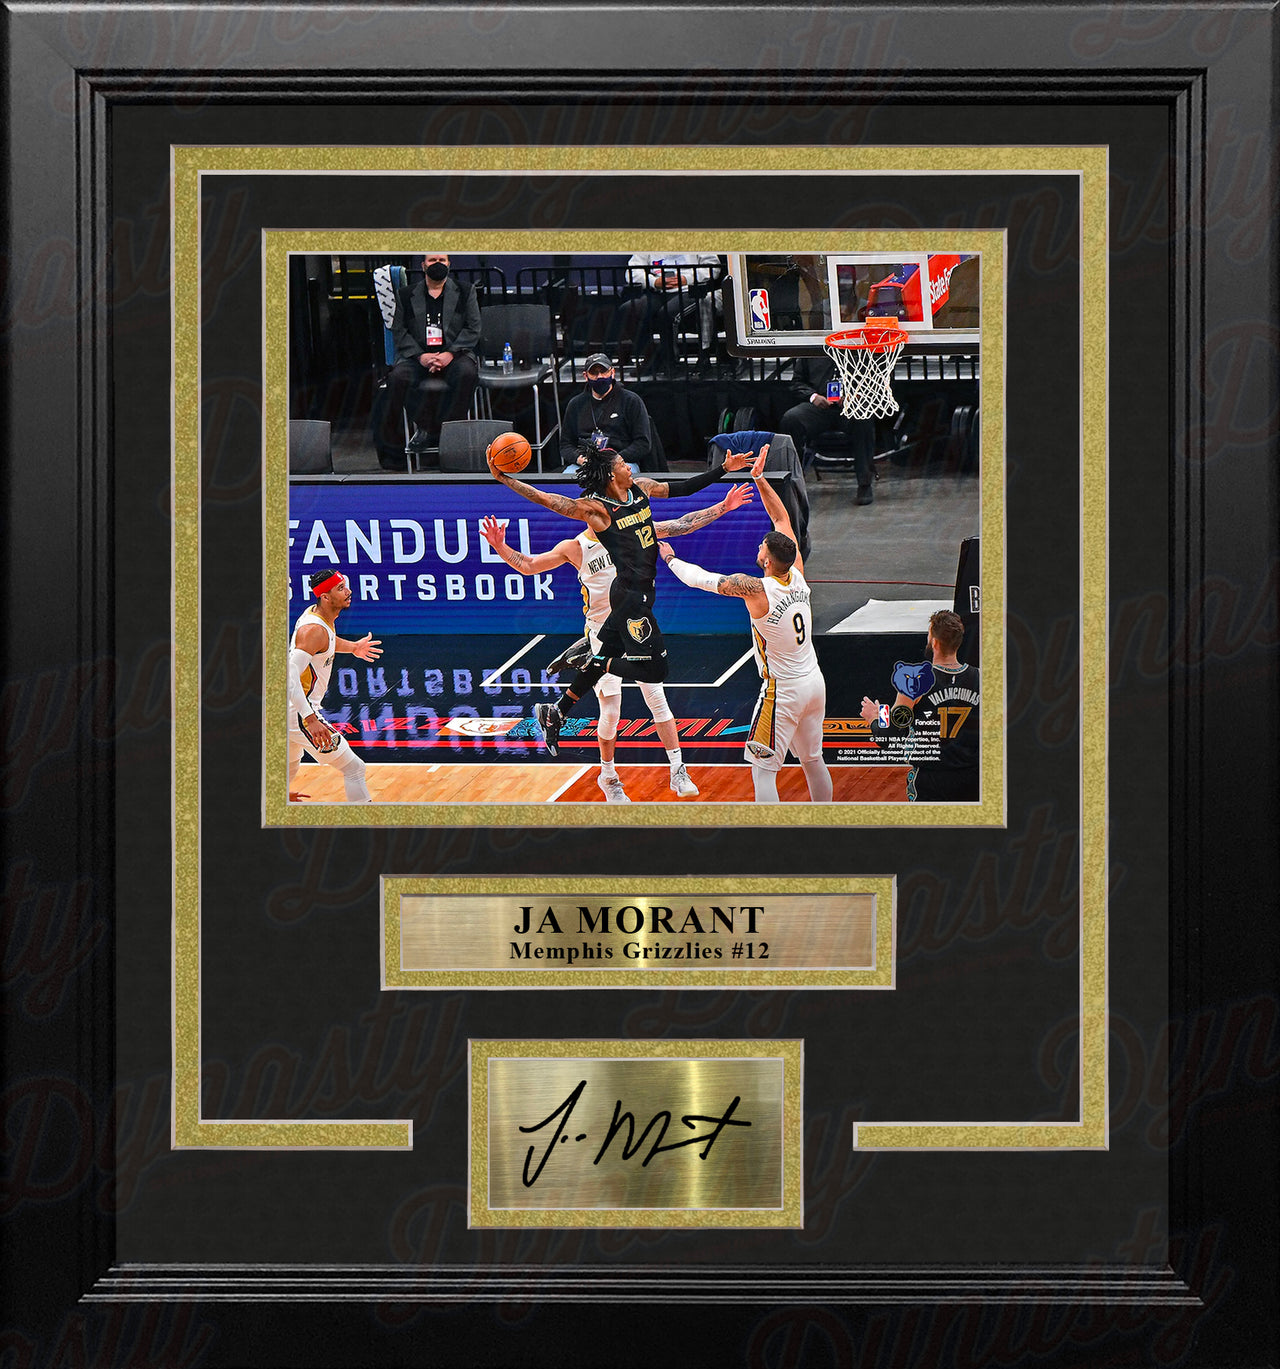 Ja Morant Slam Dunk Memphis Grizzlies 8" x 10" Framed Basketball Photo with Engraved Autograph - Dynasty Sports & Framing 